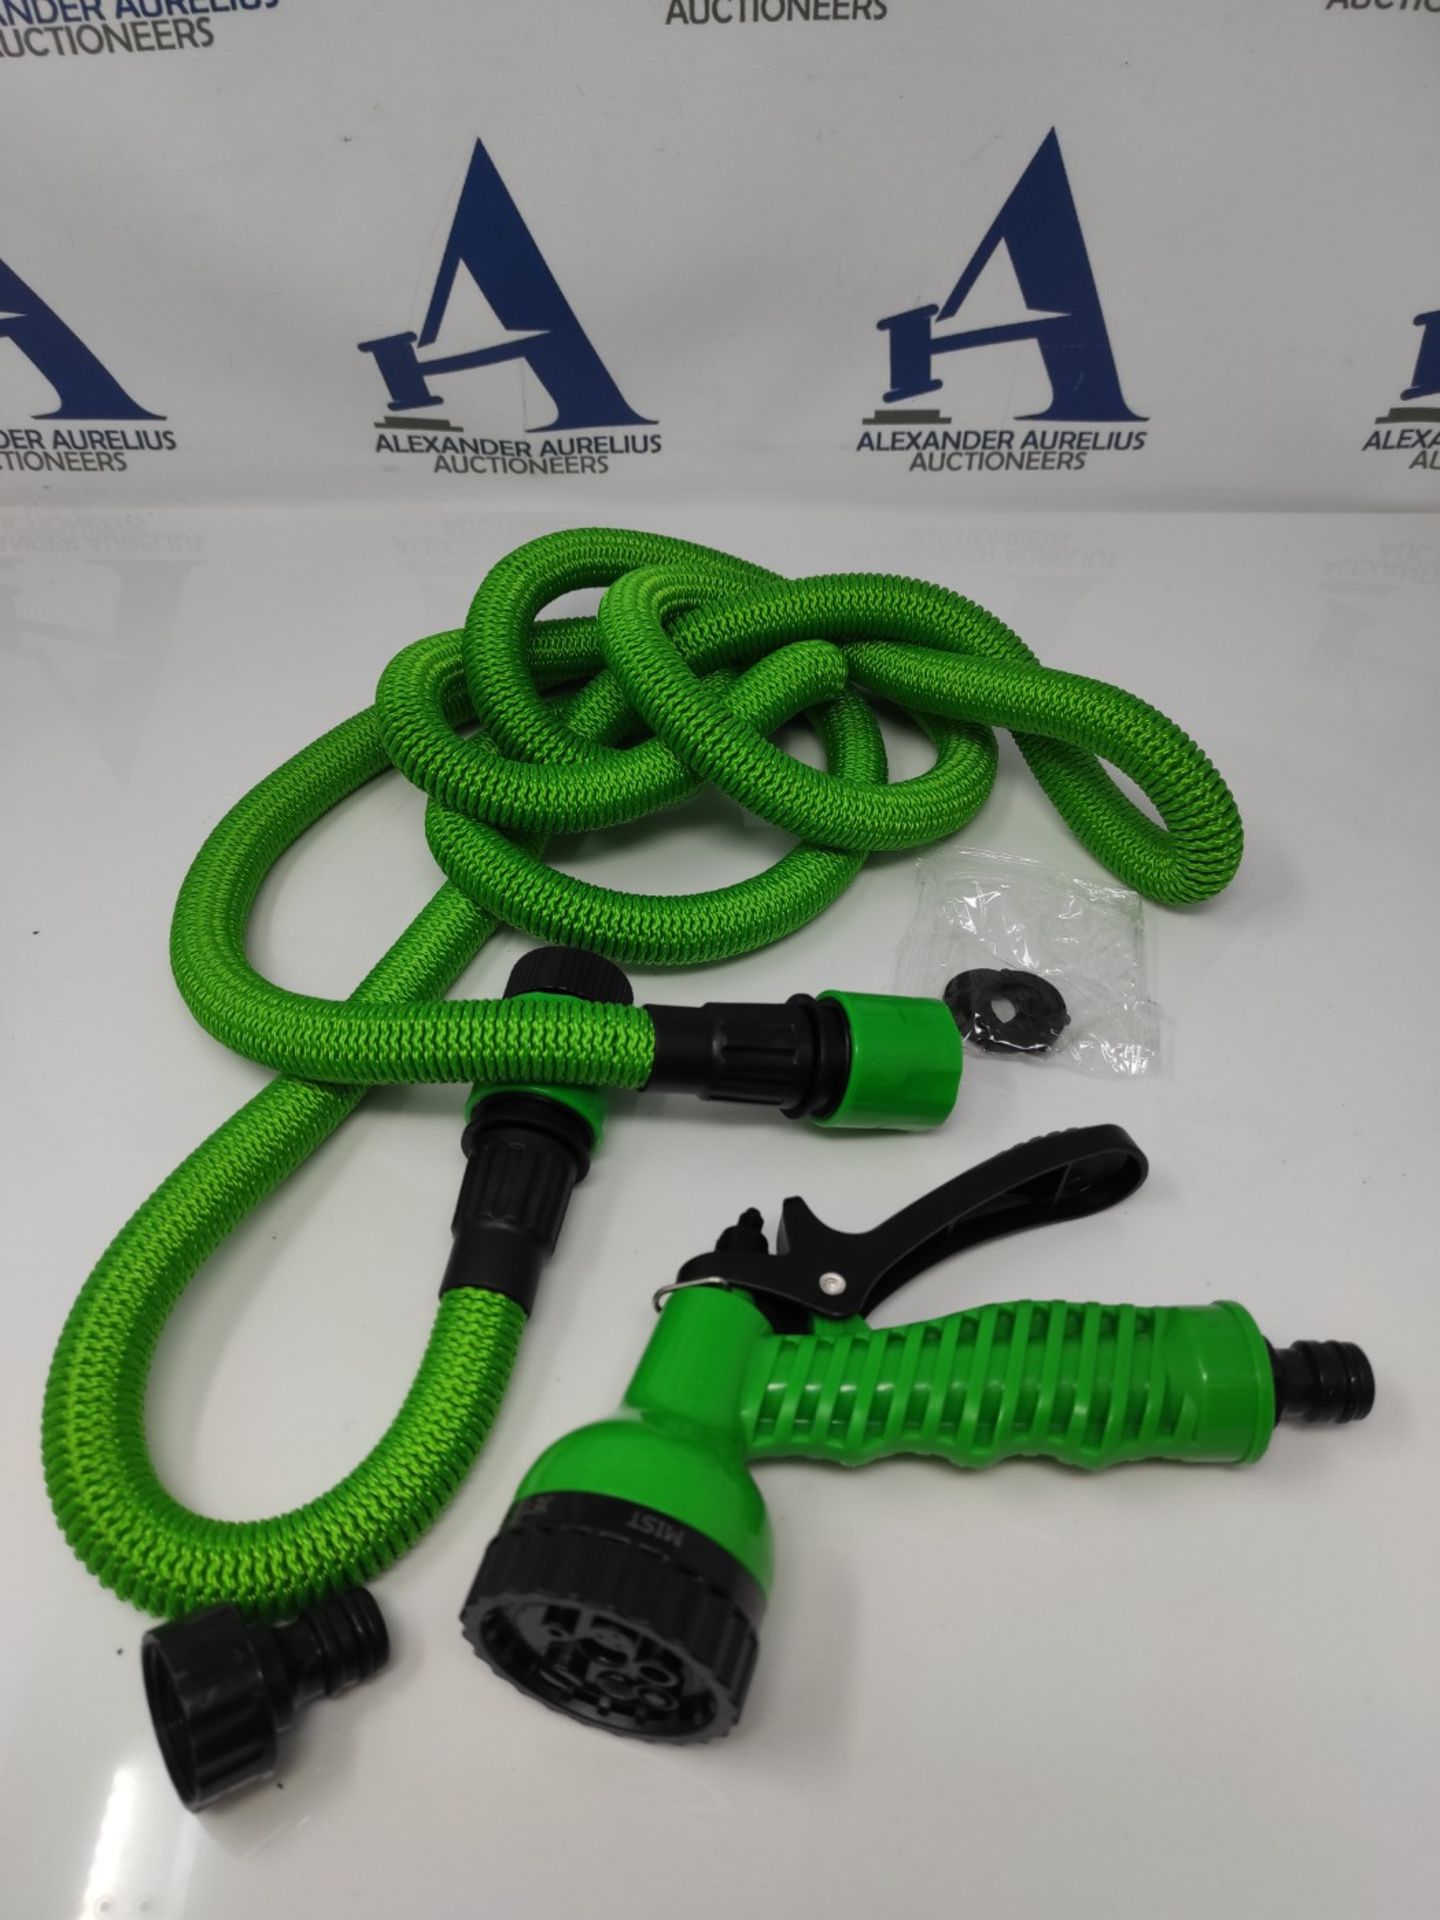 Navaris Flexible Garden Hose 2.5-7.5m - with 7 functions nozzle and quick adapters - F